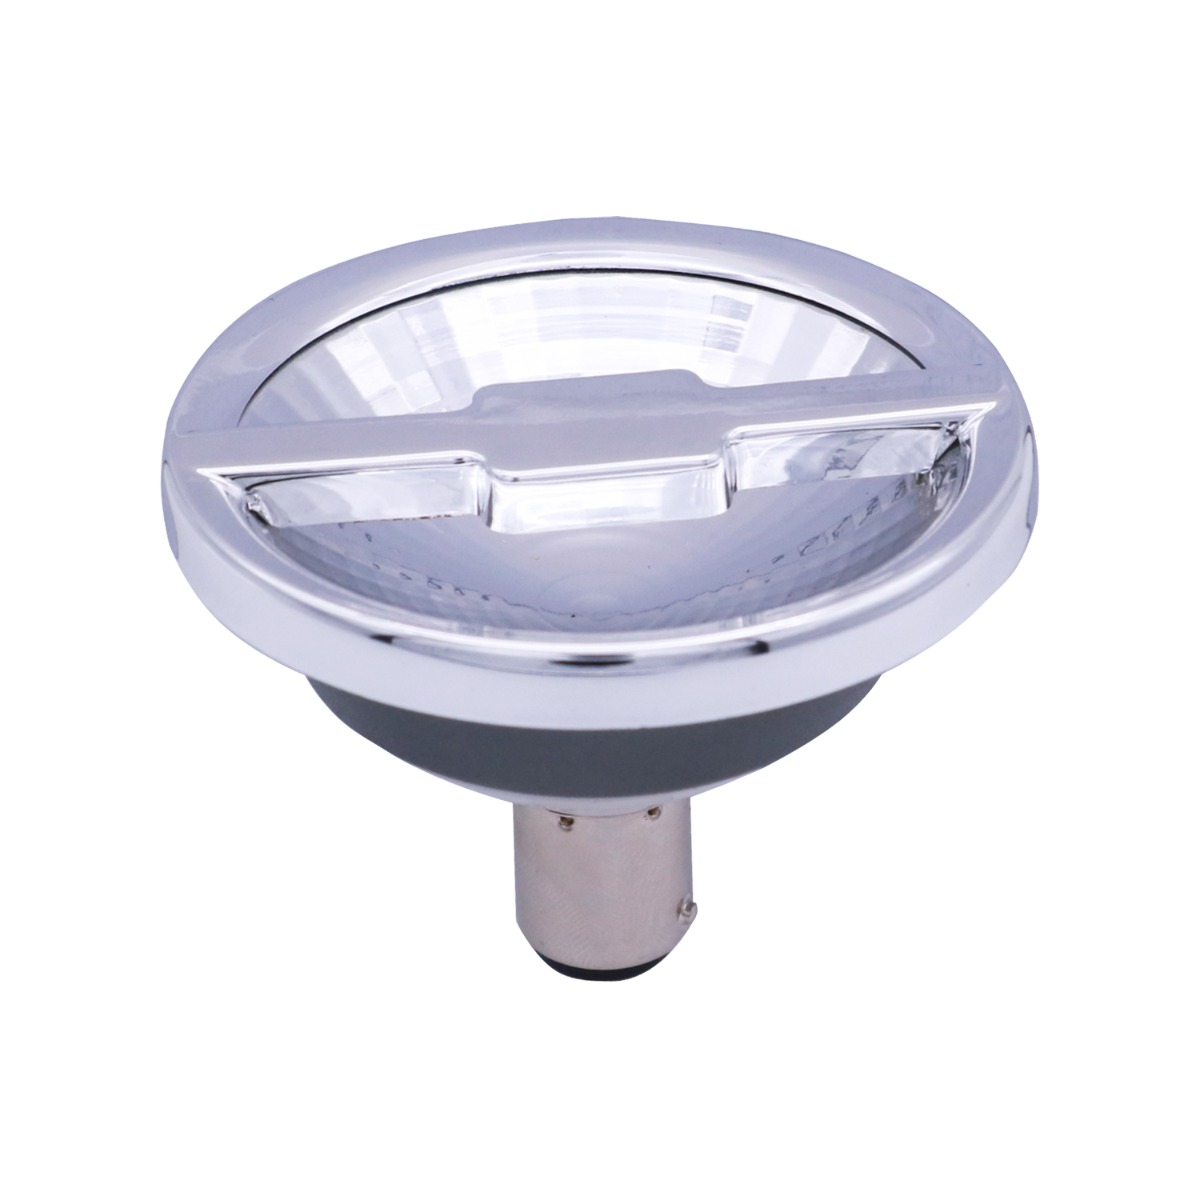 Noxion Lucent LED Spot AR70 BA15d 6W 36D | 927 Highest Colour Rendering - Dimmable - Replacer for 50W